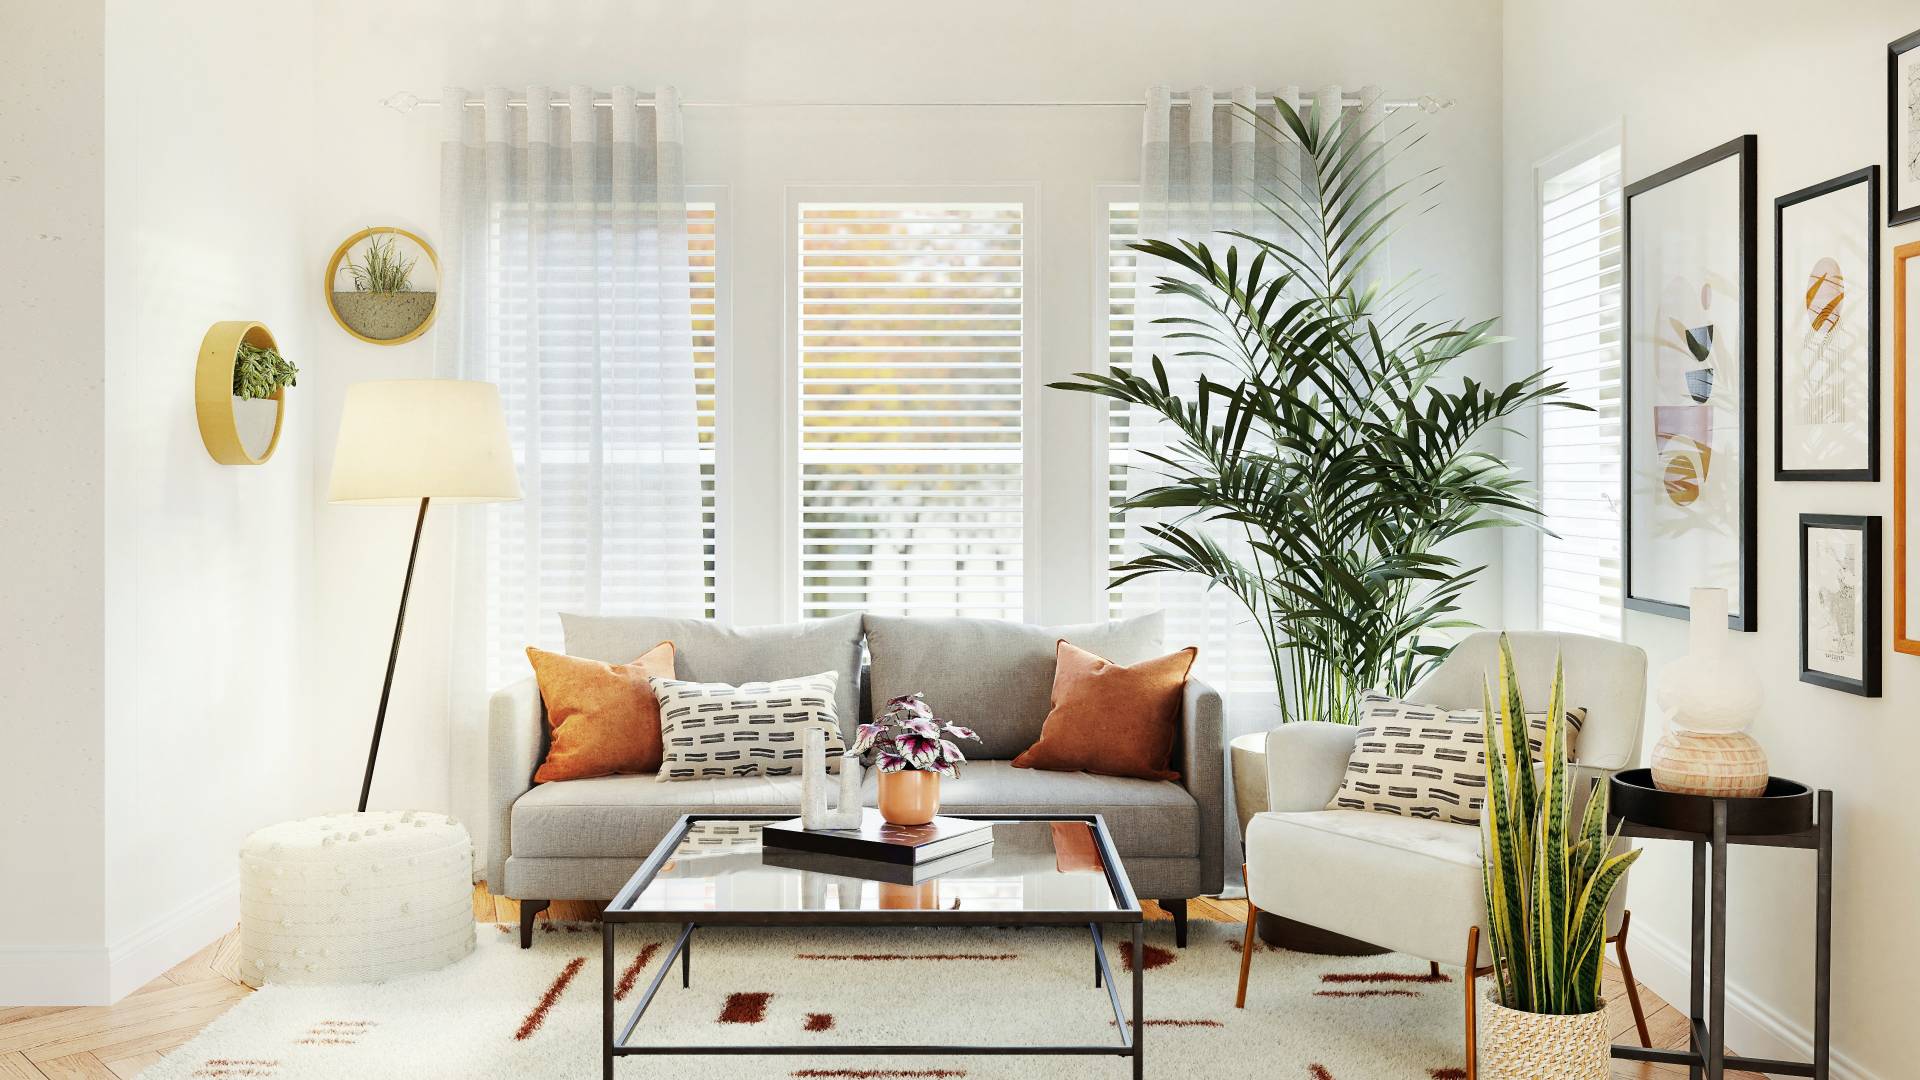 5 Things You Should Ask An Interior Designer Before Hiring Them